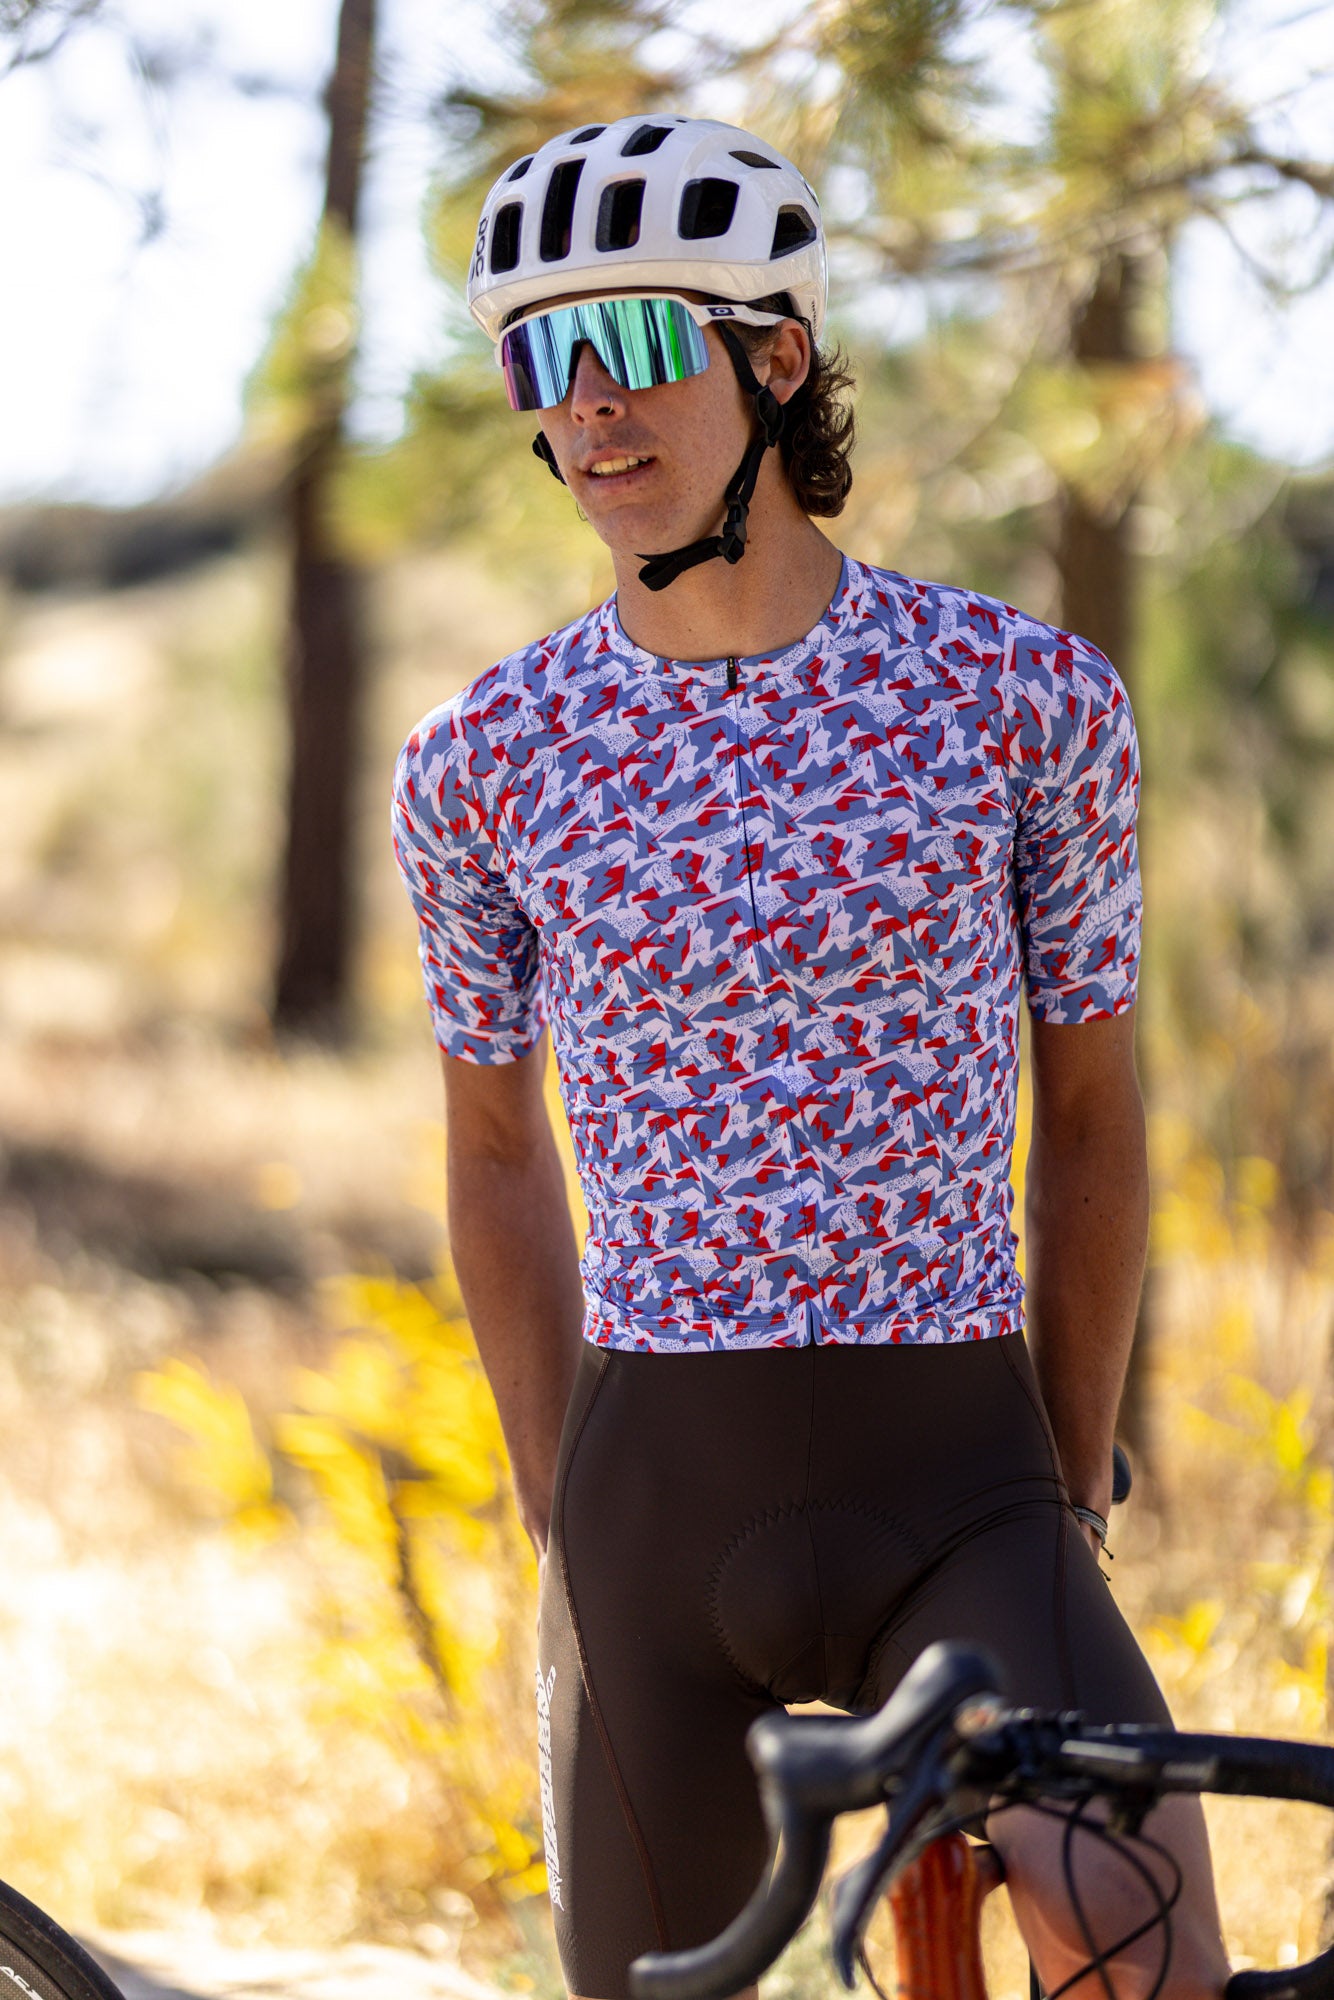 EOE Micro Print Jersey Red/White/Blue